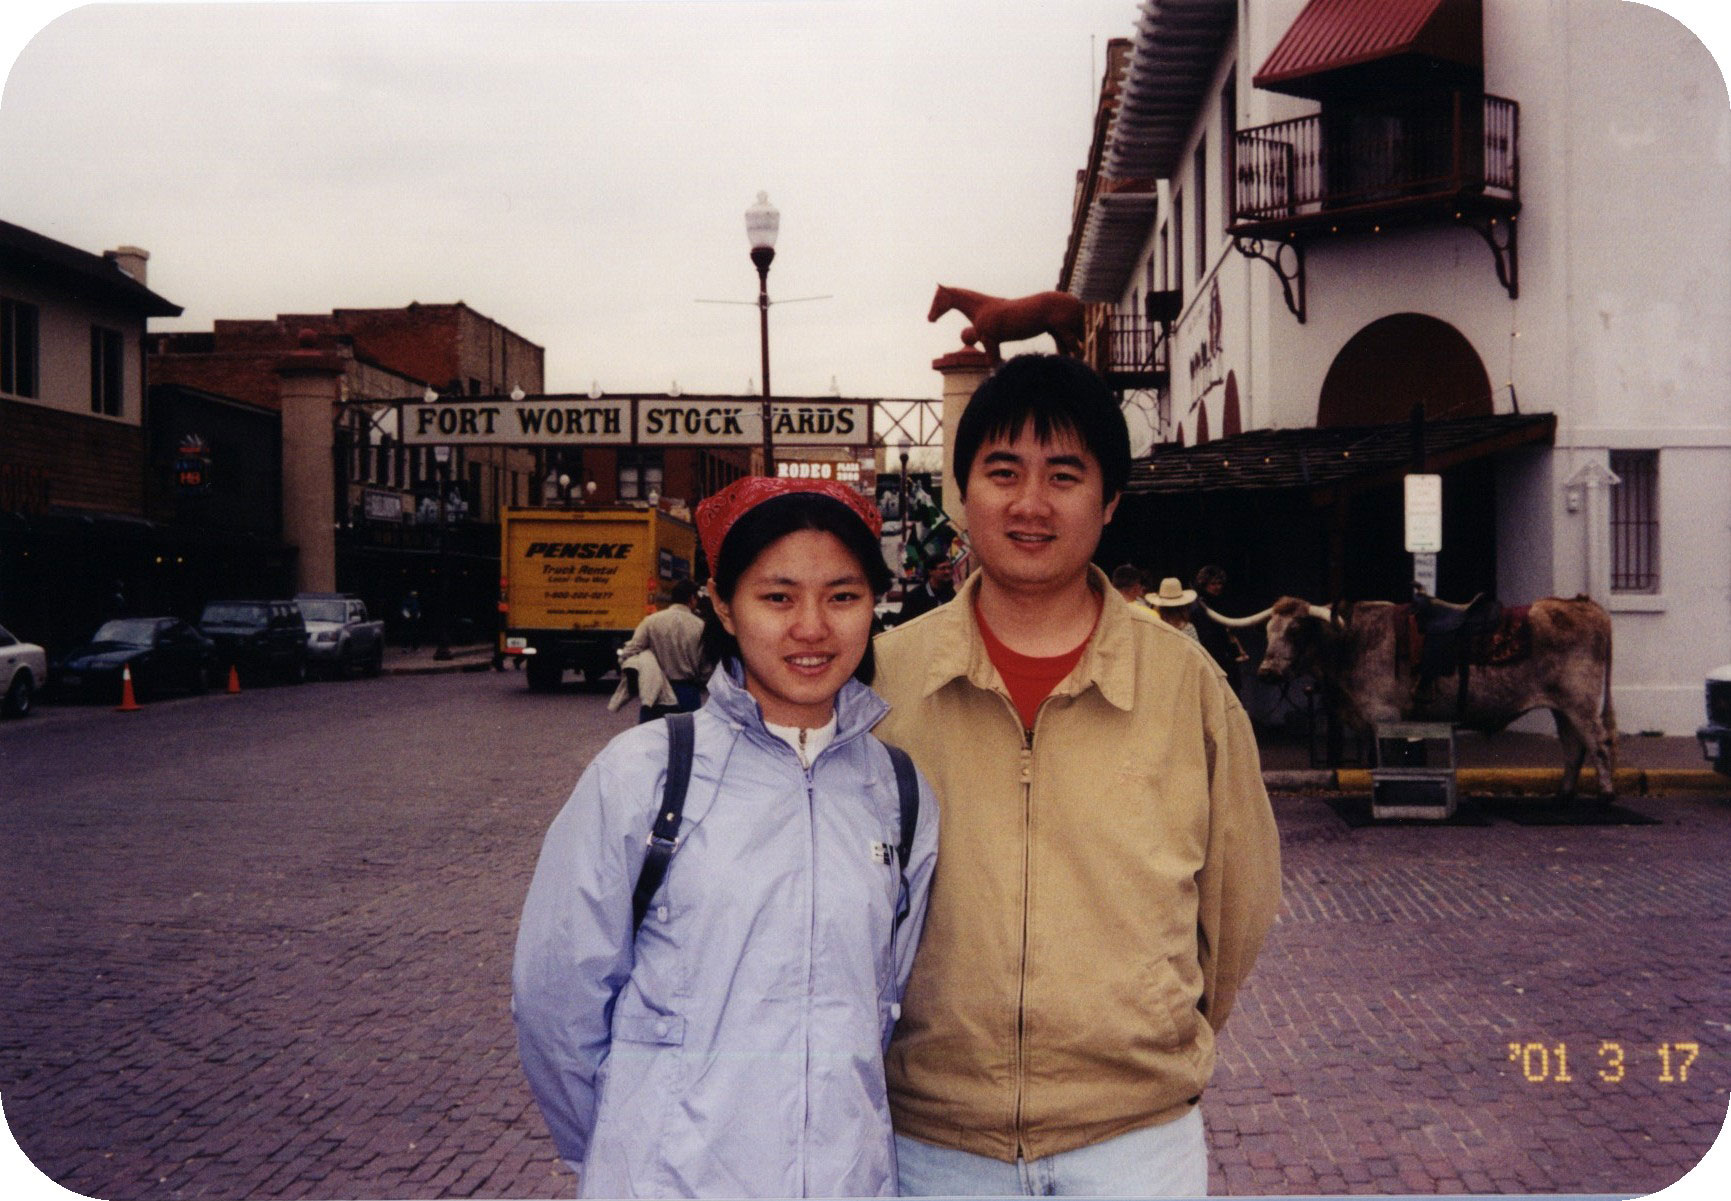 Zhiling Zhang and Xiaohu Xia at the Fort Worth Stock Yards in 2001.